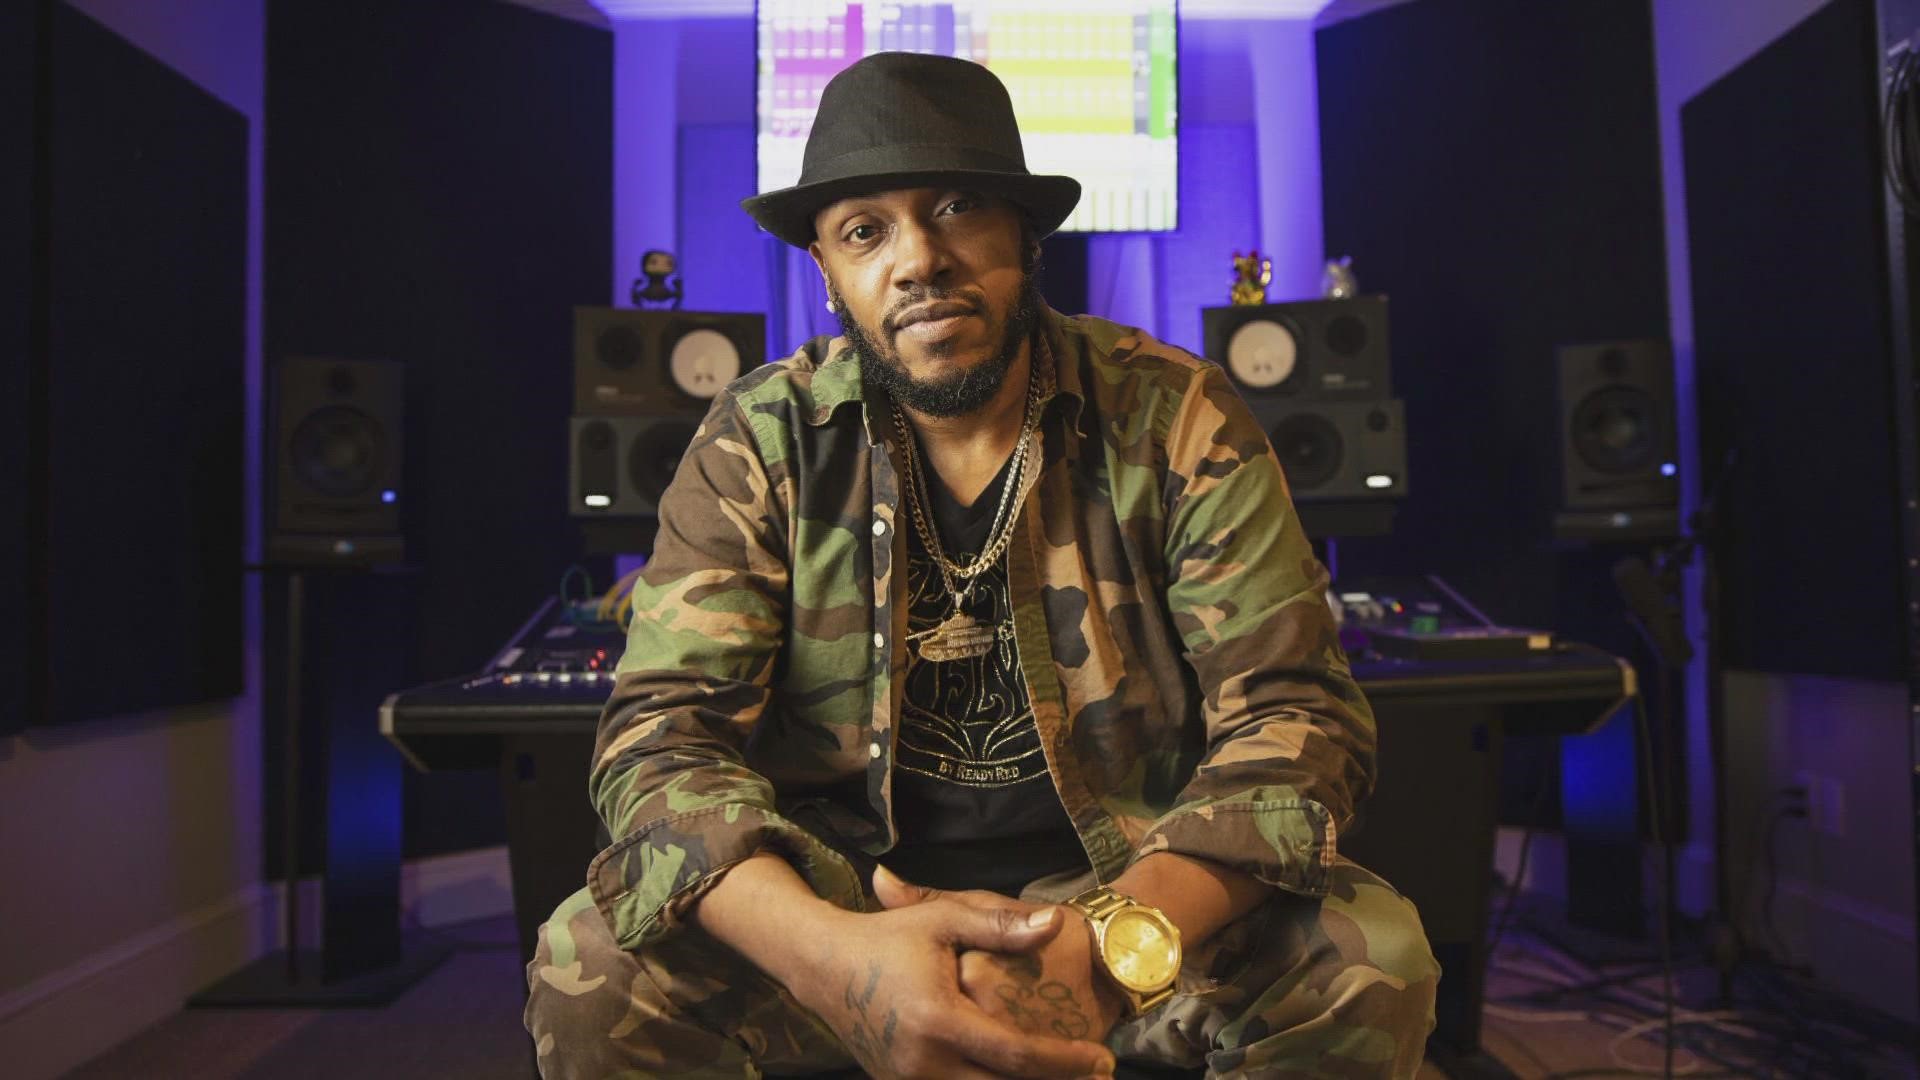 Mystikal was convicted almost two decades ago of sexual battery and was recently cleared of a second allegation of rape and kidnapping.